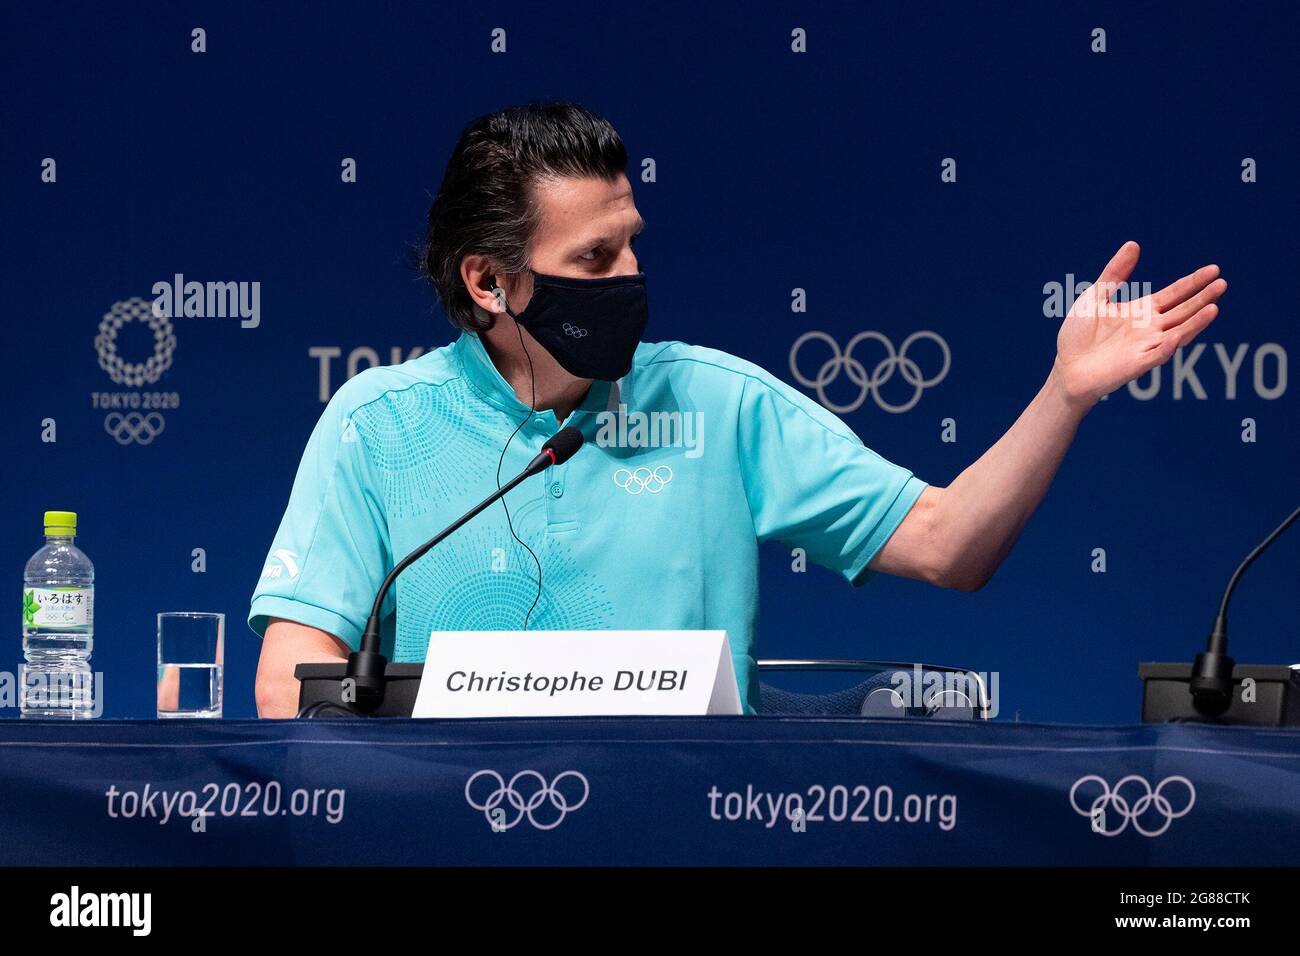 Tokyo, Japan. 18th July, 2021. International Olympic Committee's Olympic Games Executive Director Christophe Dubi attends a press conference at the Main Press Center (MPC) of Tokyo 2020 in Tokyo, Japan, July 18, 2021. Credit: Du Yu/Xinhua/Alamy Live News Stock Photo